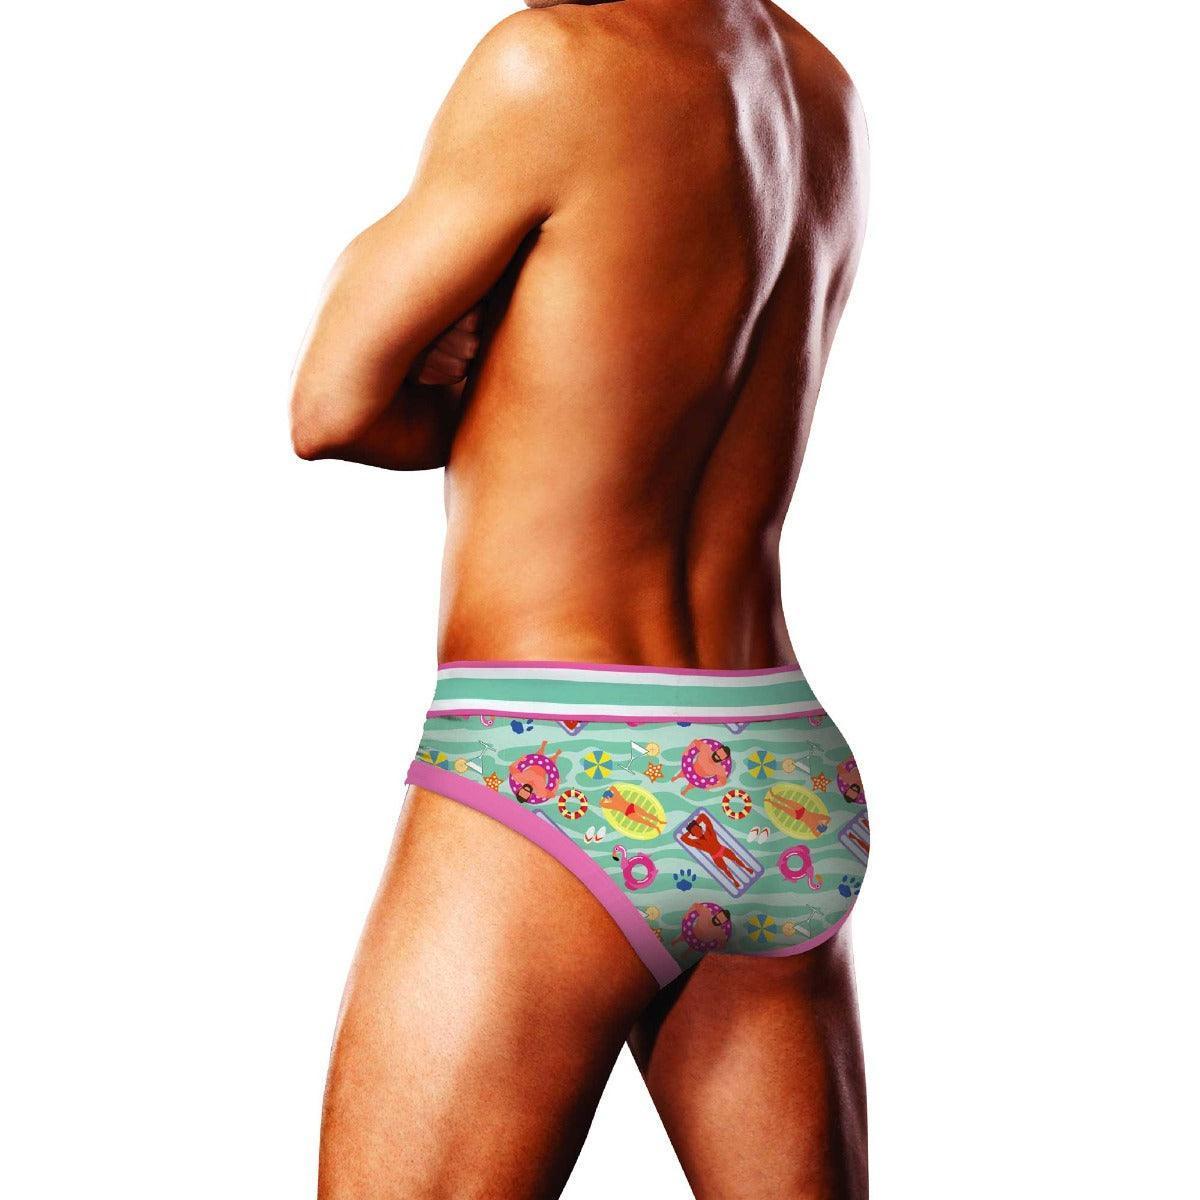 Prowler Swimming Brief XSmall